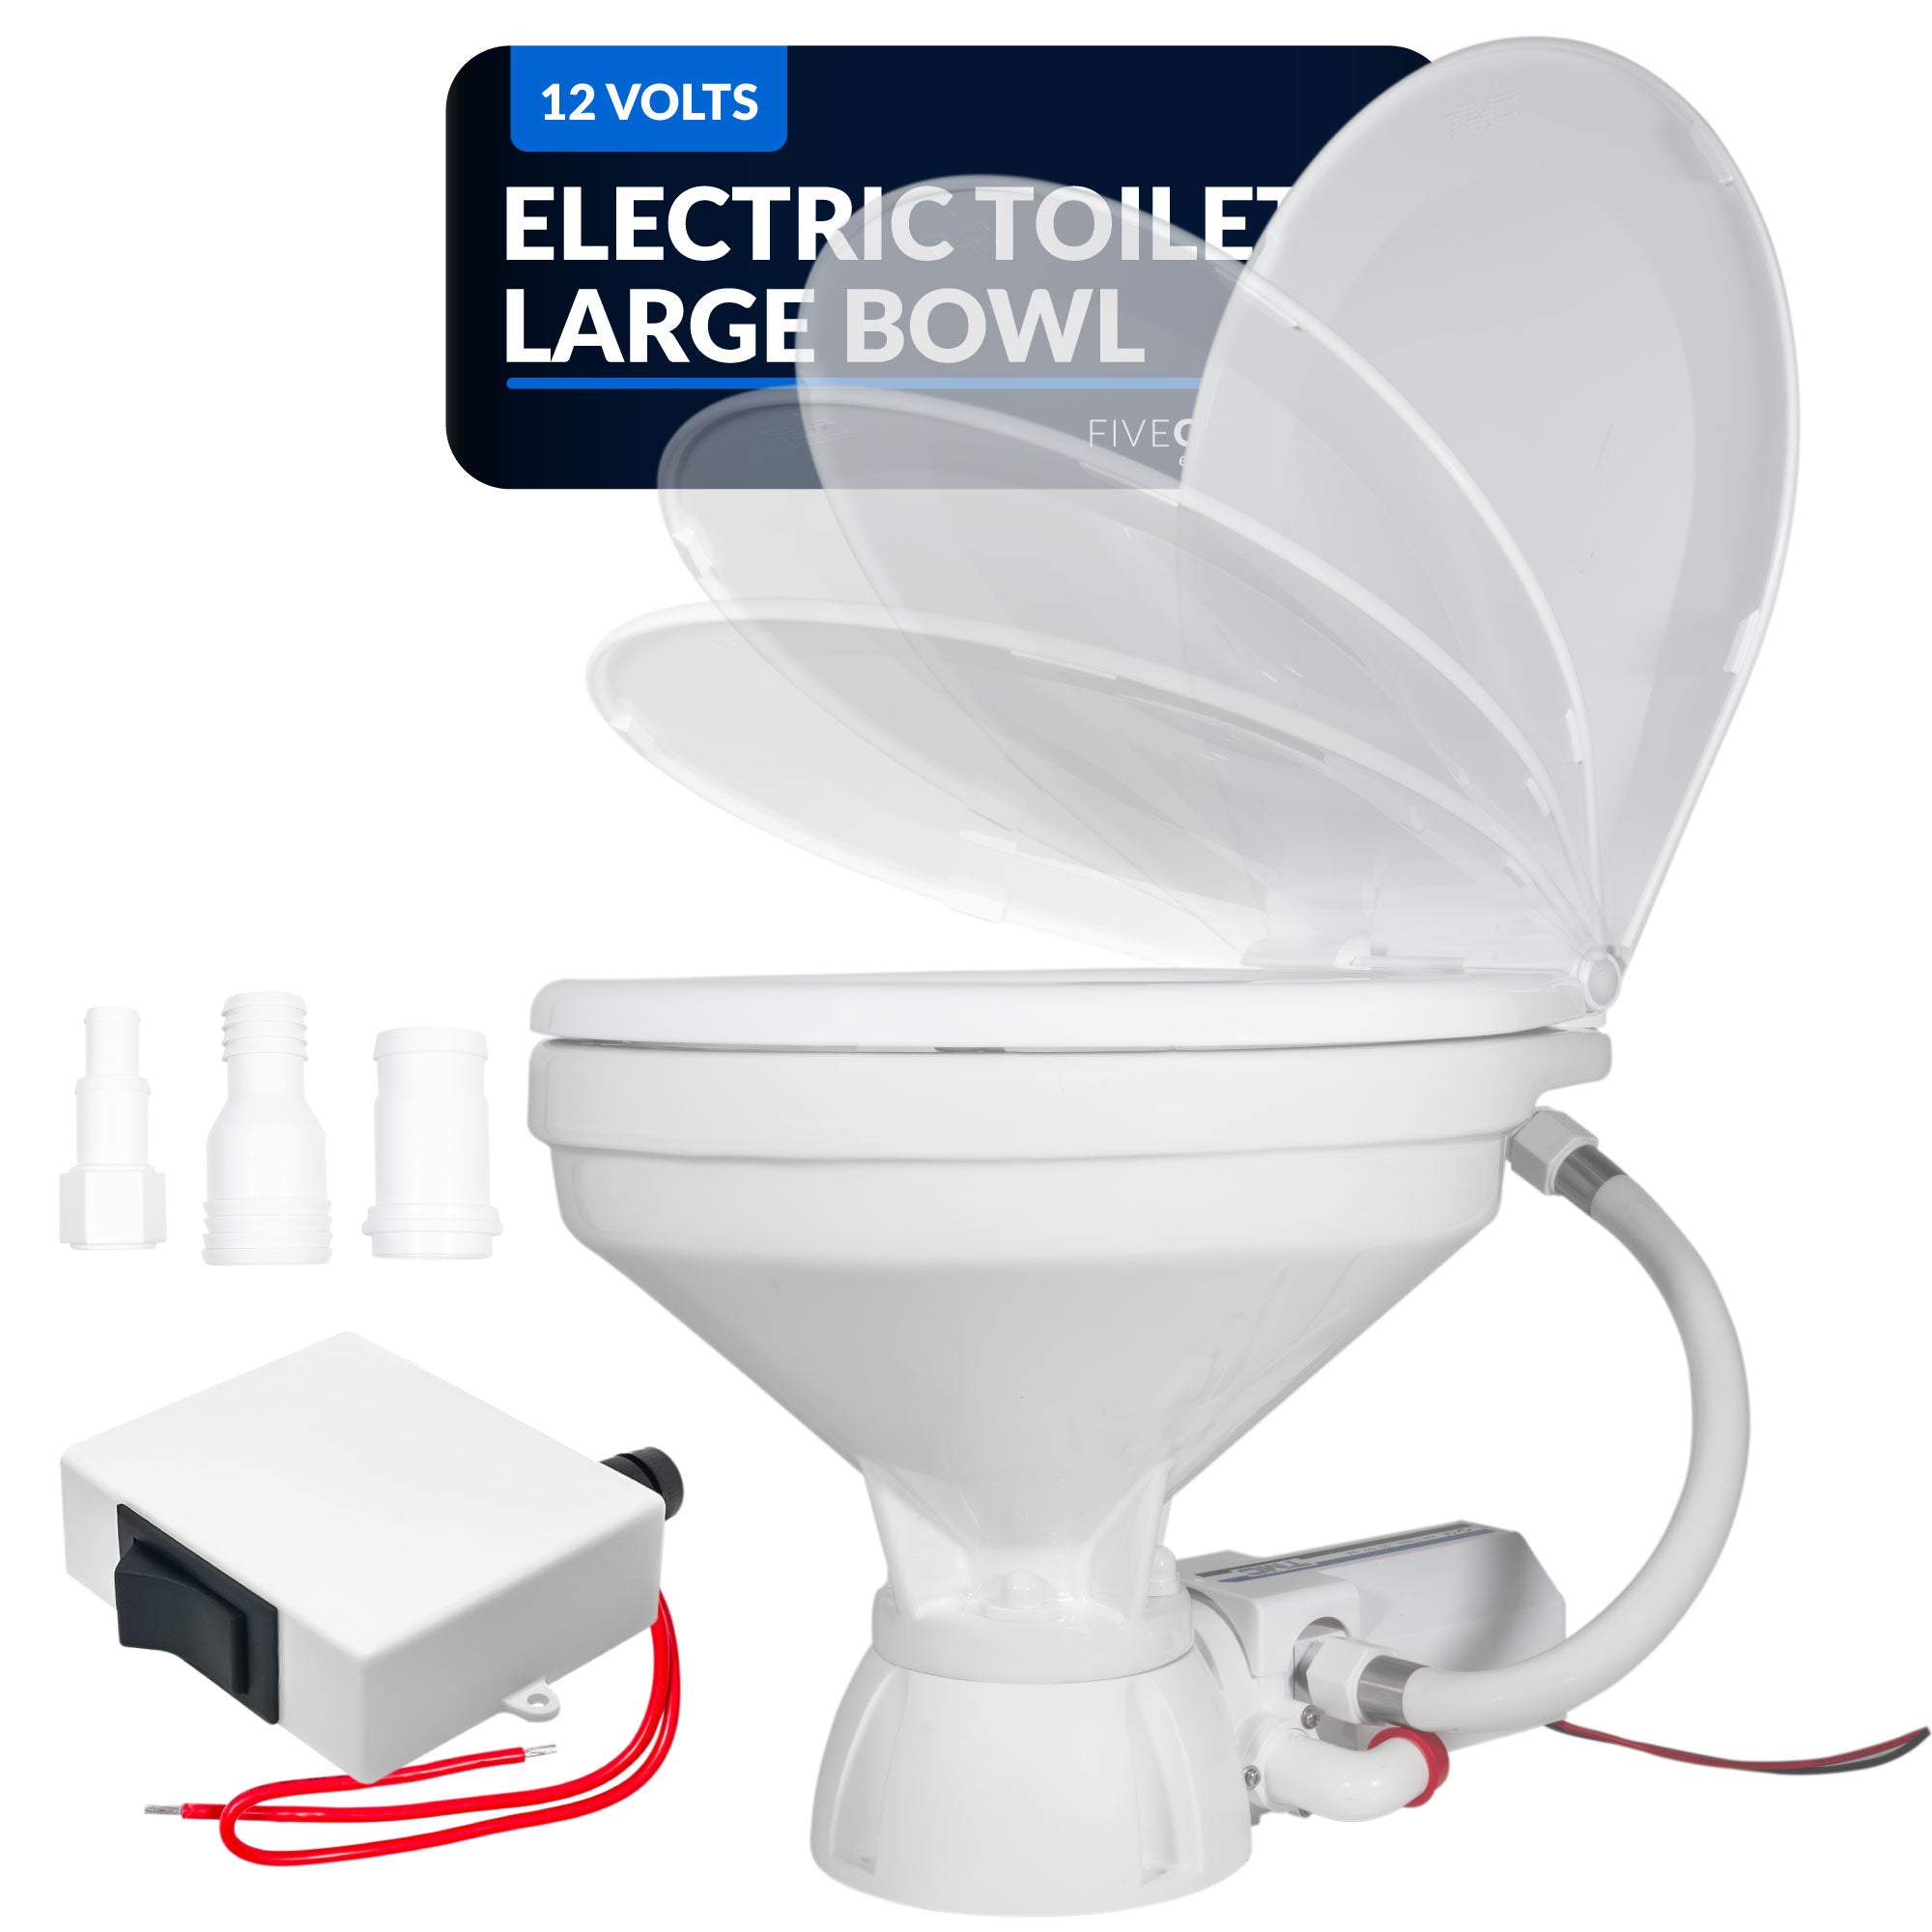 TMC Electric Toilet with Threaded-On Hose Connection, Large Bowl, Smart Flush Control 12V DC <BR><BR>- FO4706